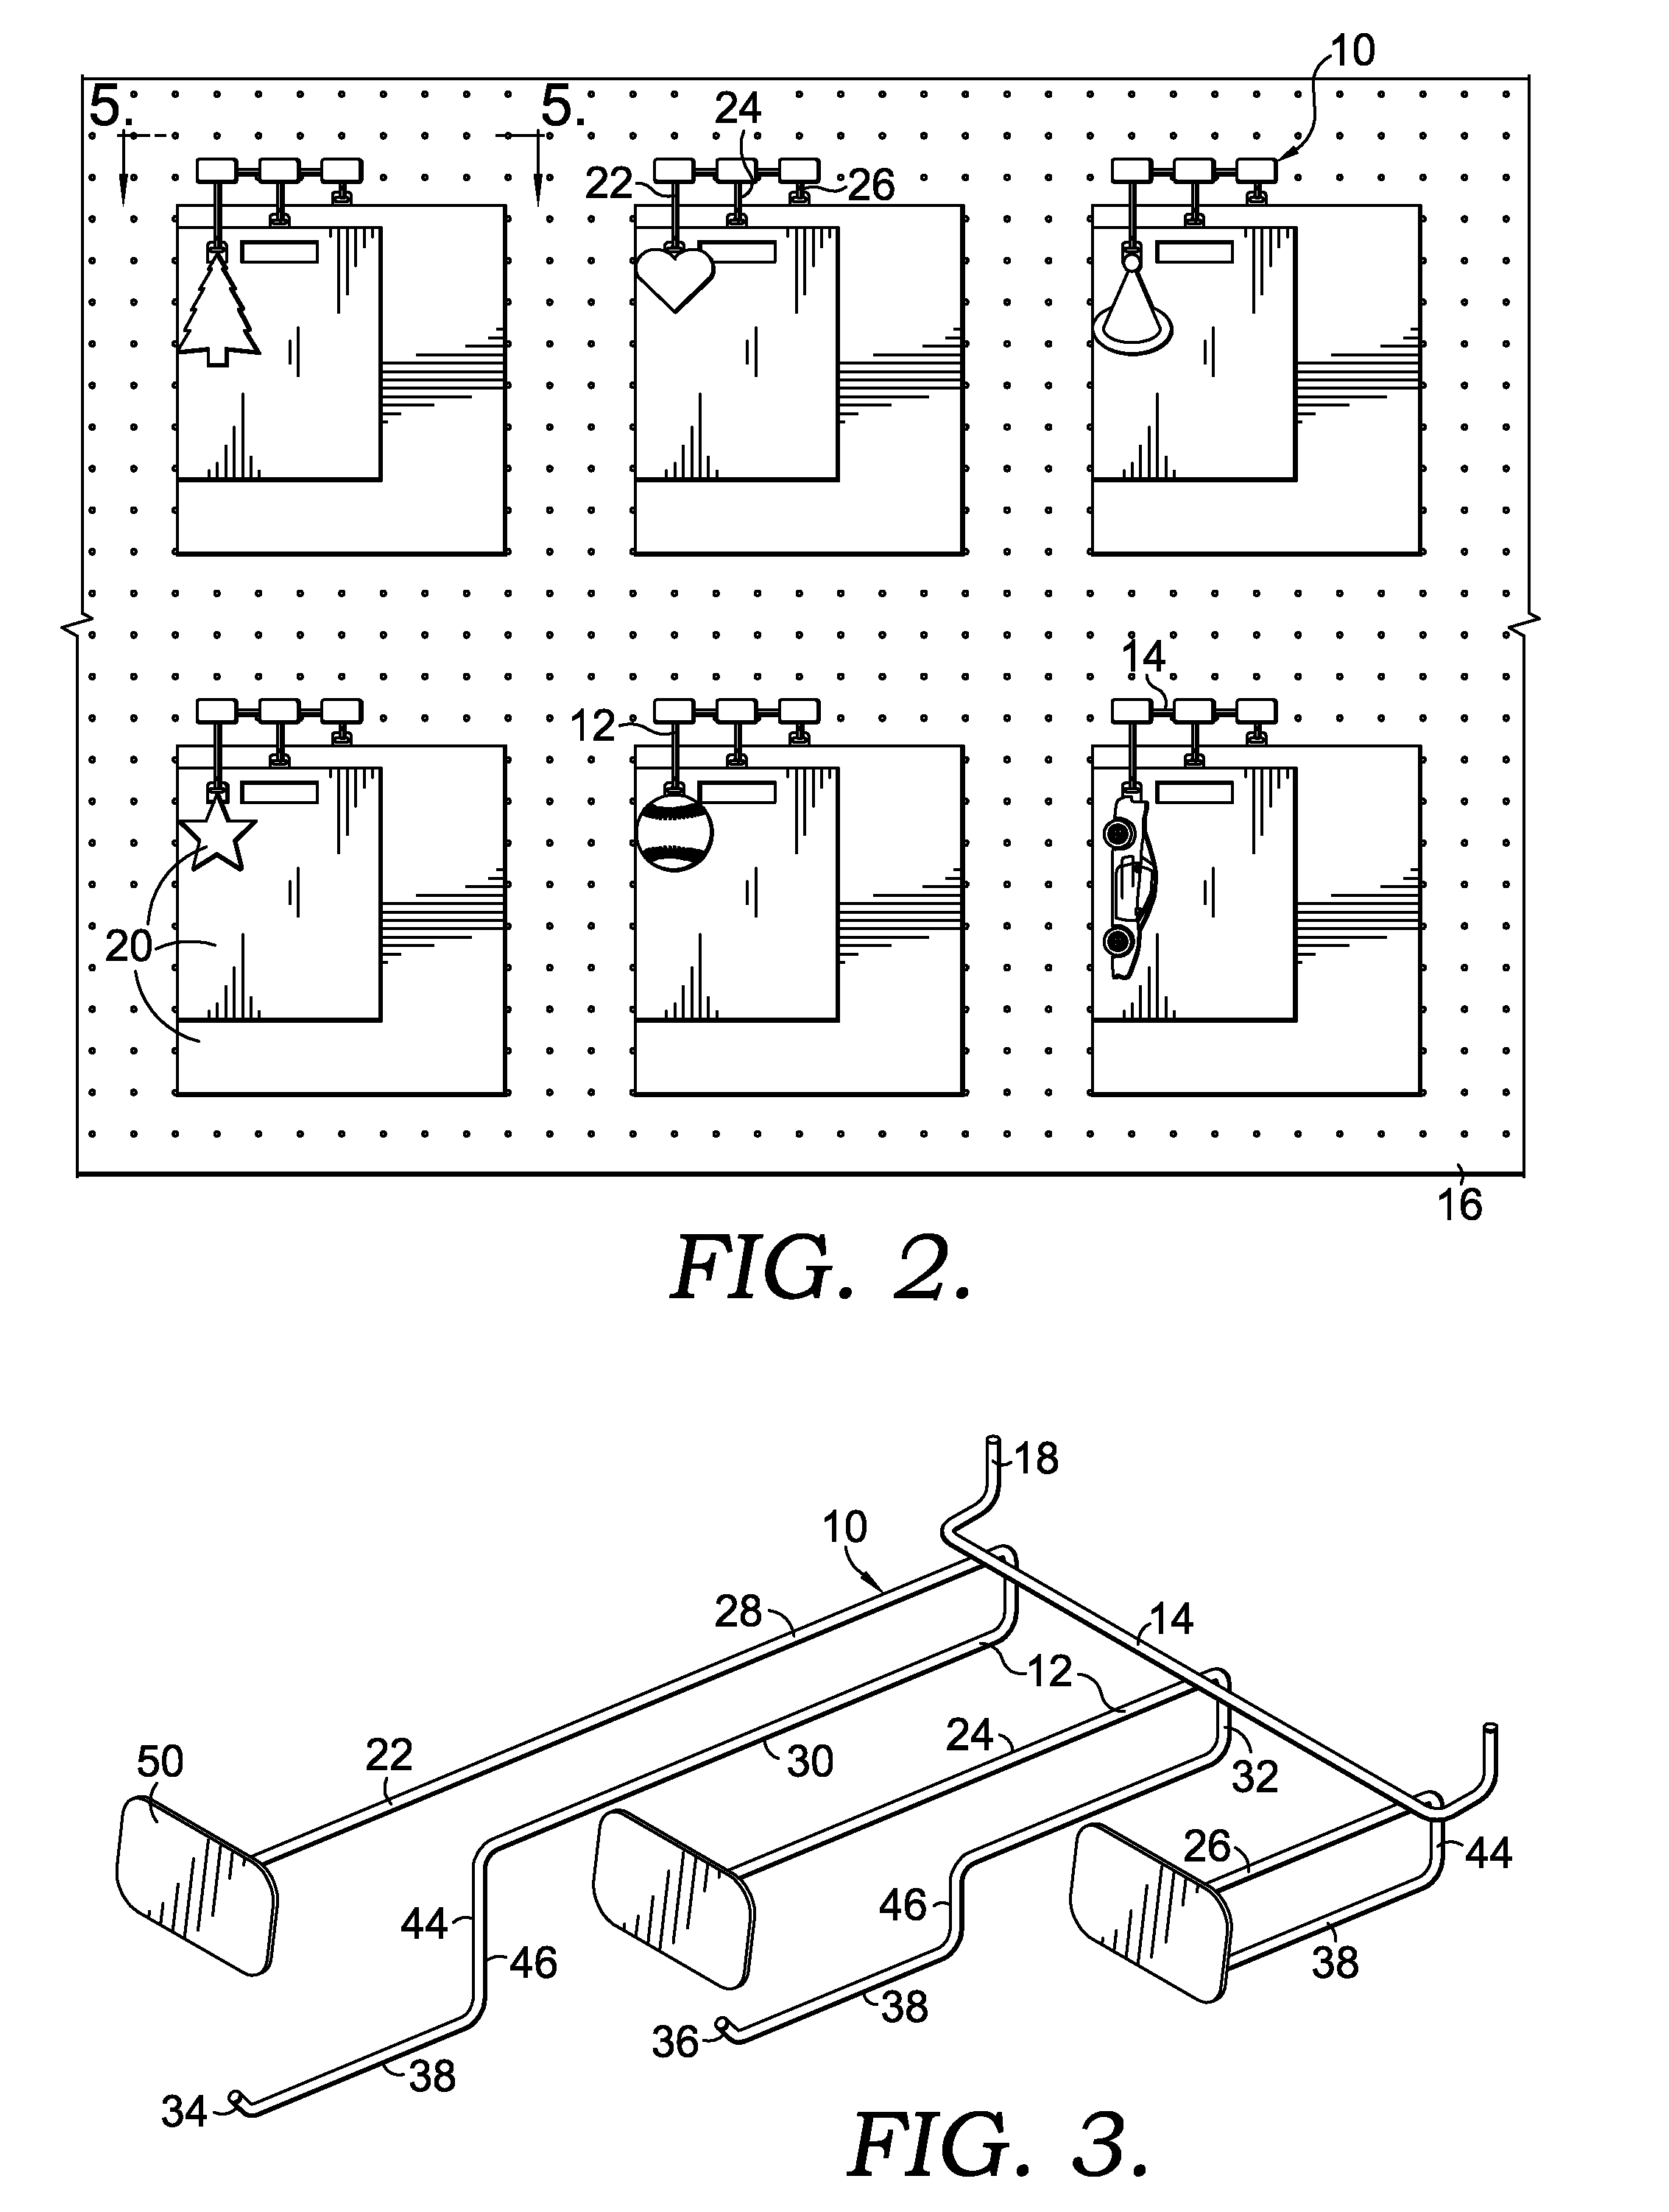 Multi-Level Product Display Device